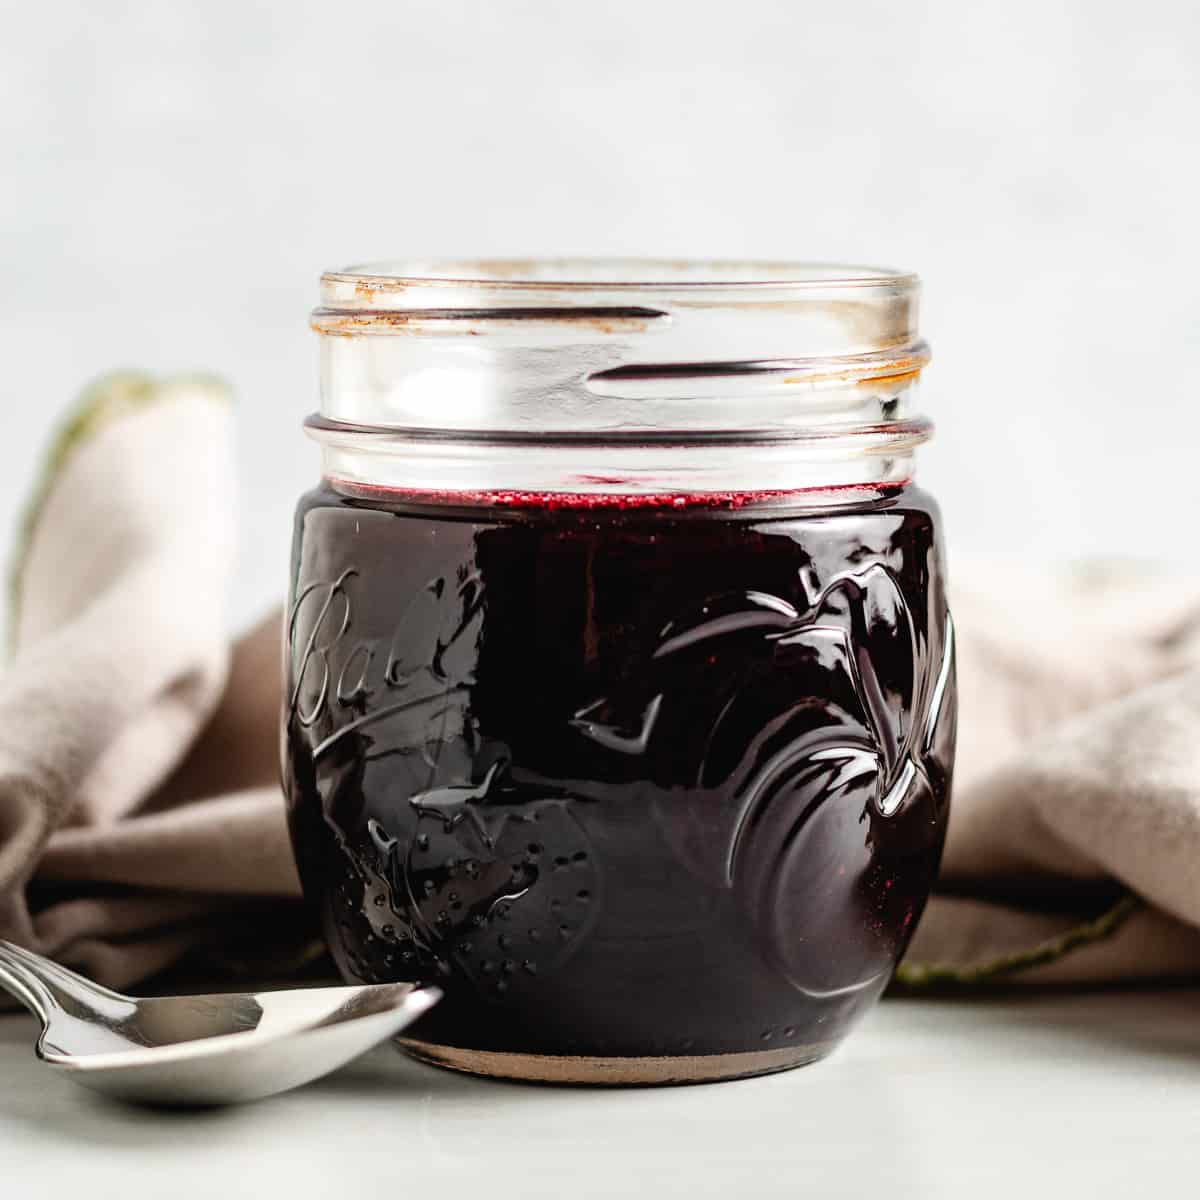 Blackberry simple syrup